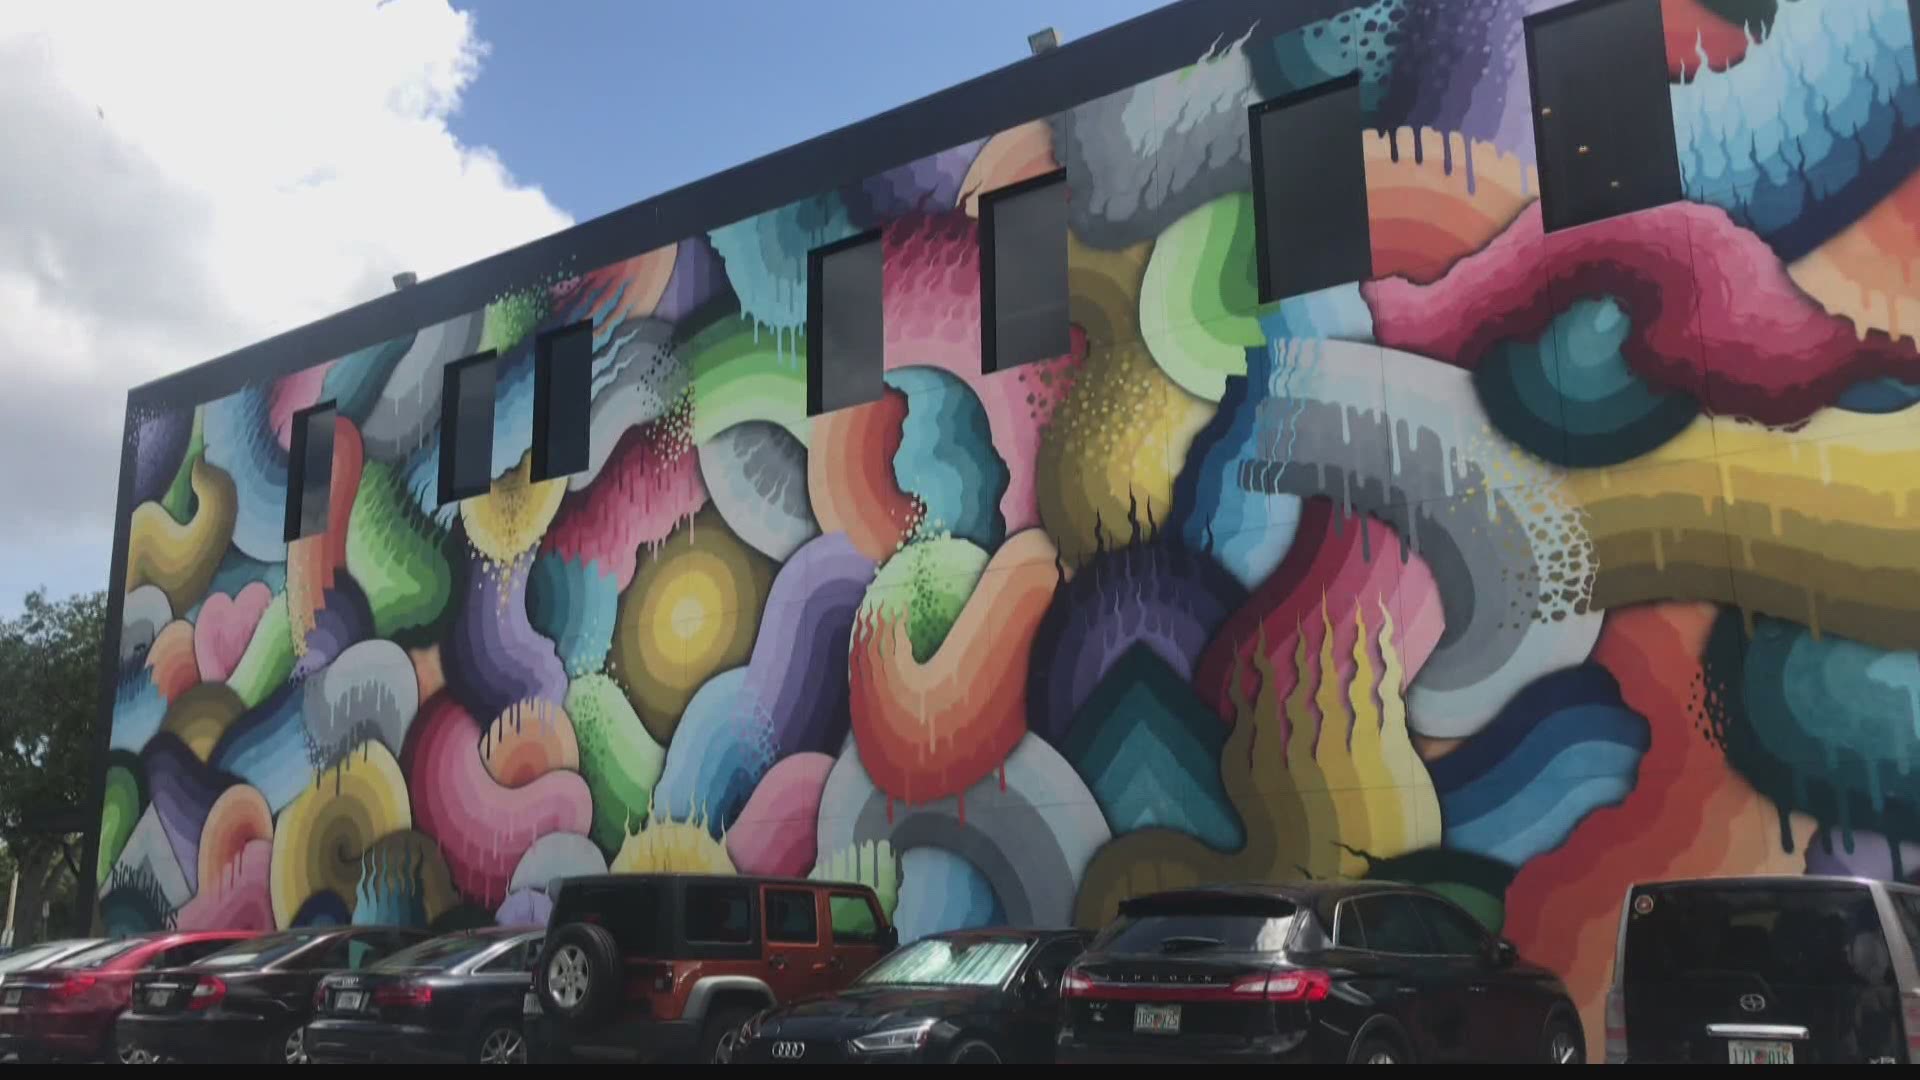 More than 80 St. Pete murals are now part of a  drive-through gallery experience and available to view through the PixelStix app.